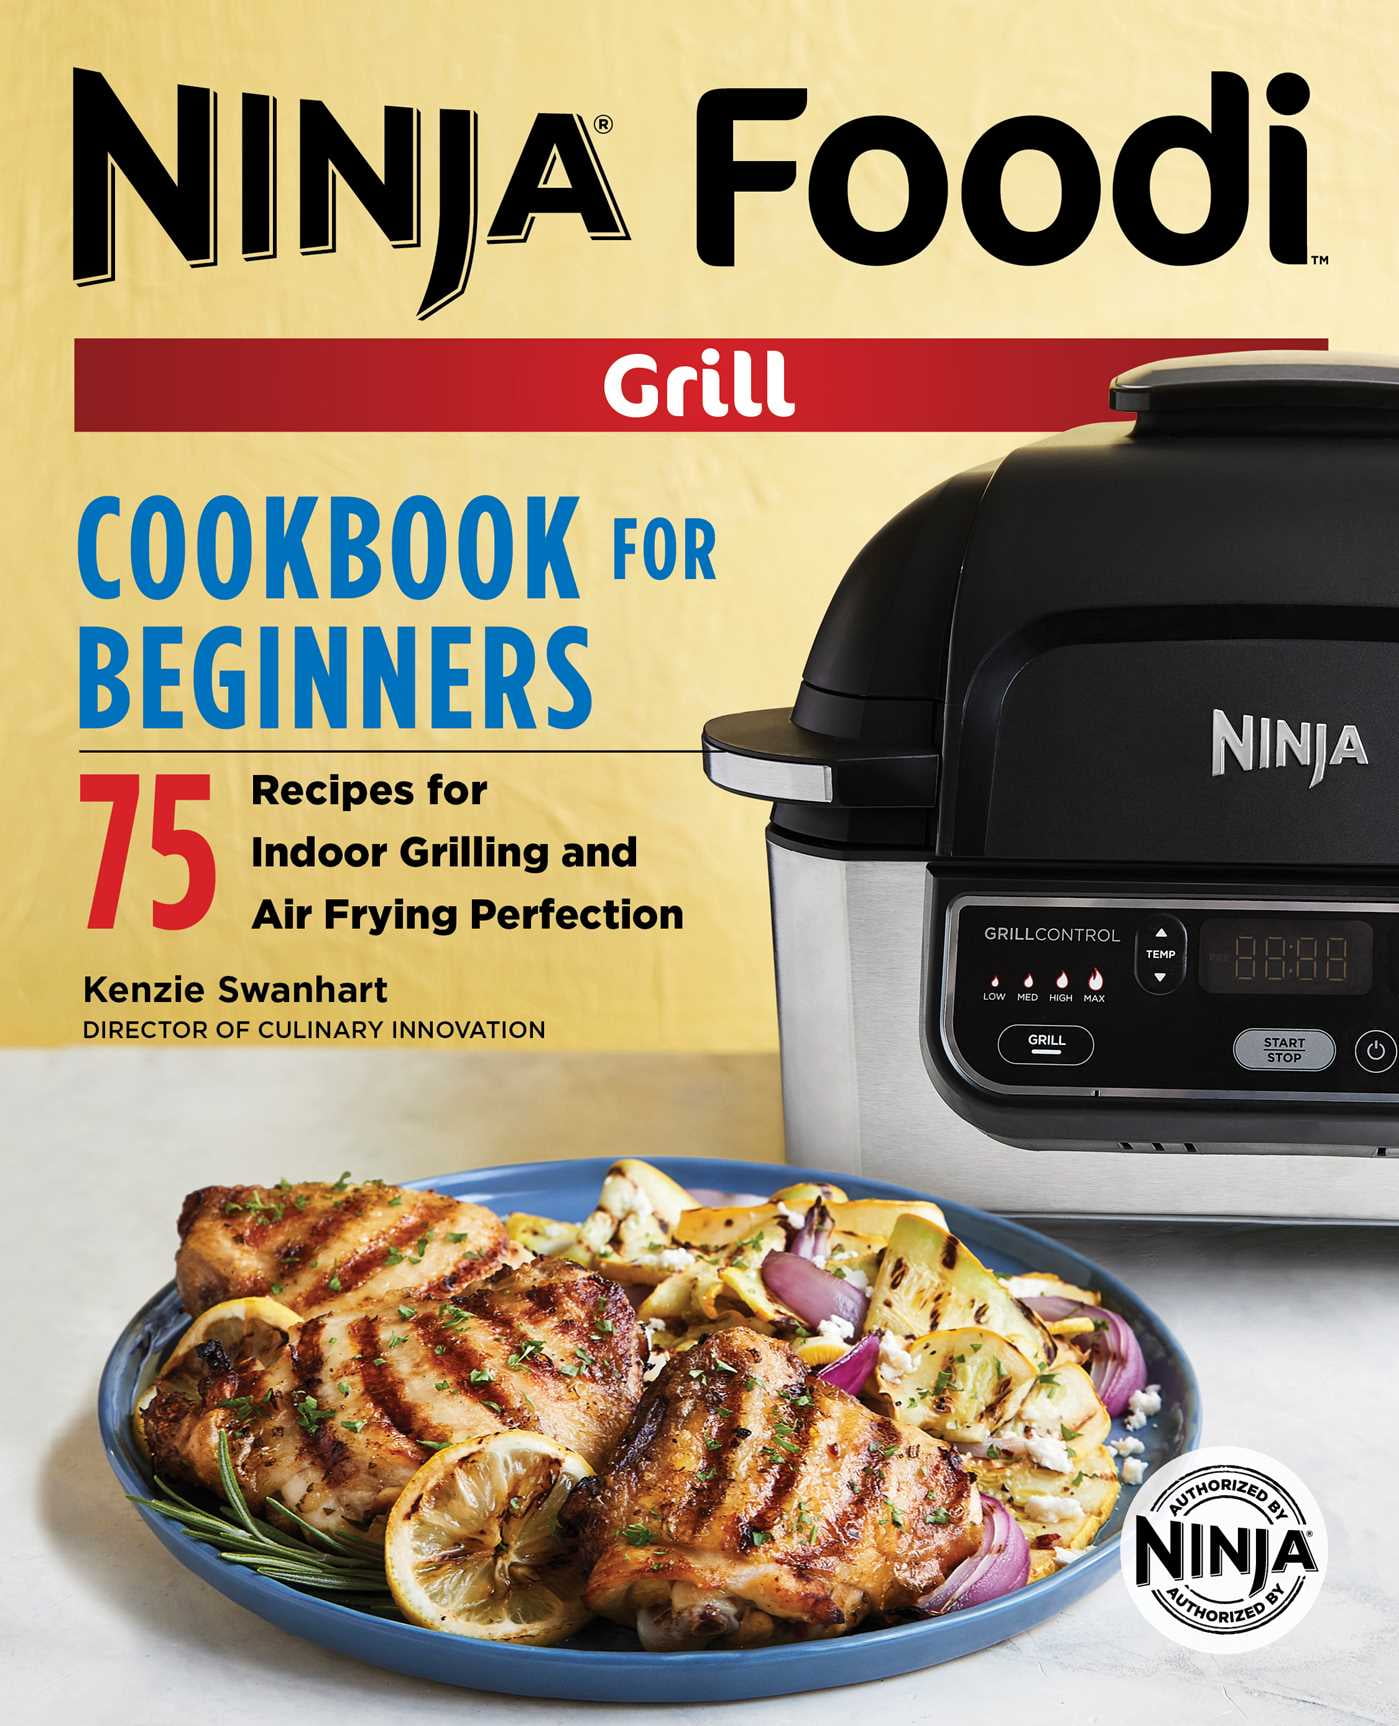 Ninja Foodi Grill Cookbook 1000: 1000 Affordable Savory Recipes for Ninja Foodi Smart XL Grill and Ninja Foodi AG301 Grill to Air Fry Roast Bake Dehydrate Broil and More [Book]